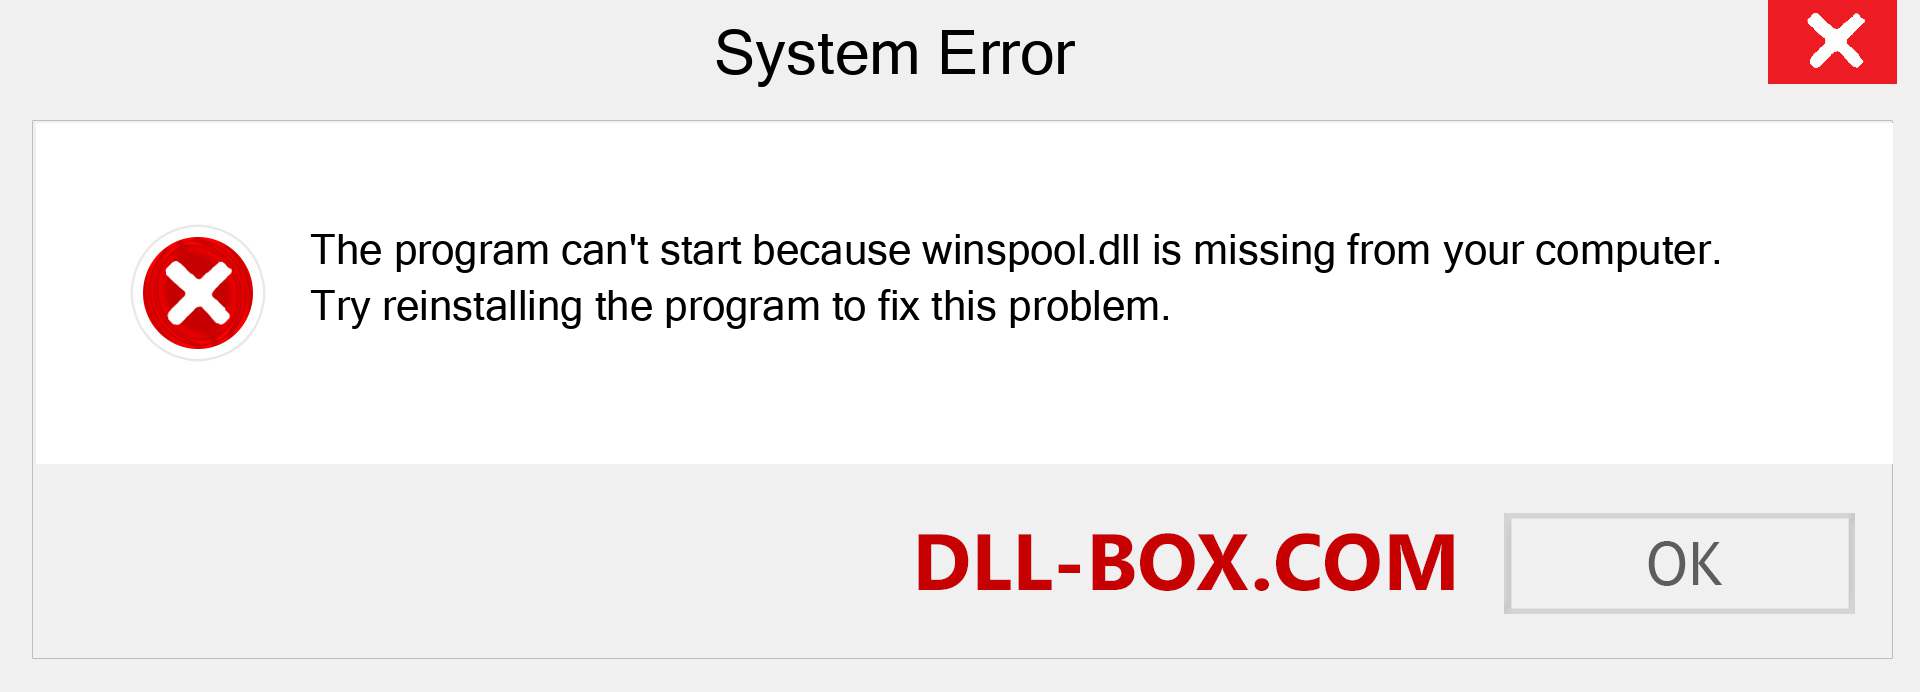  winspool.dll file is missing?. Download for Windows 7, 8, 10 - Fix  winspool dll Missing Error on Windows, photos, images